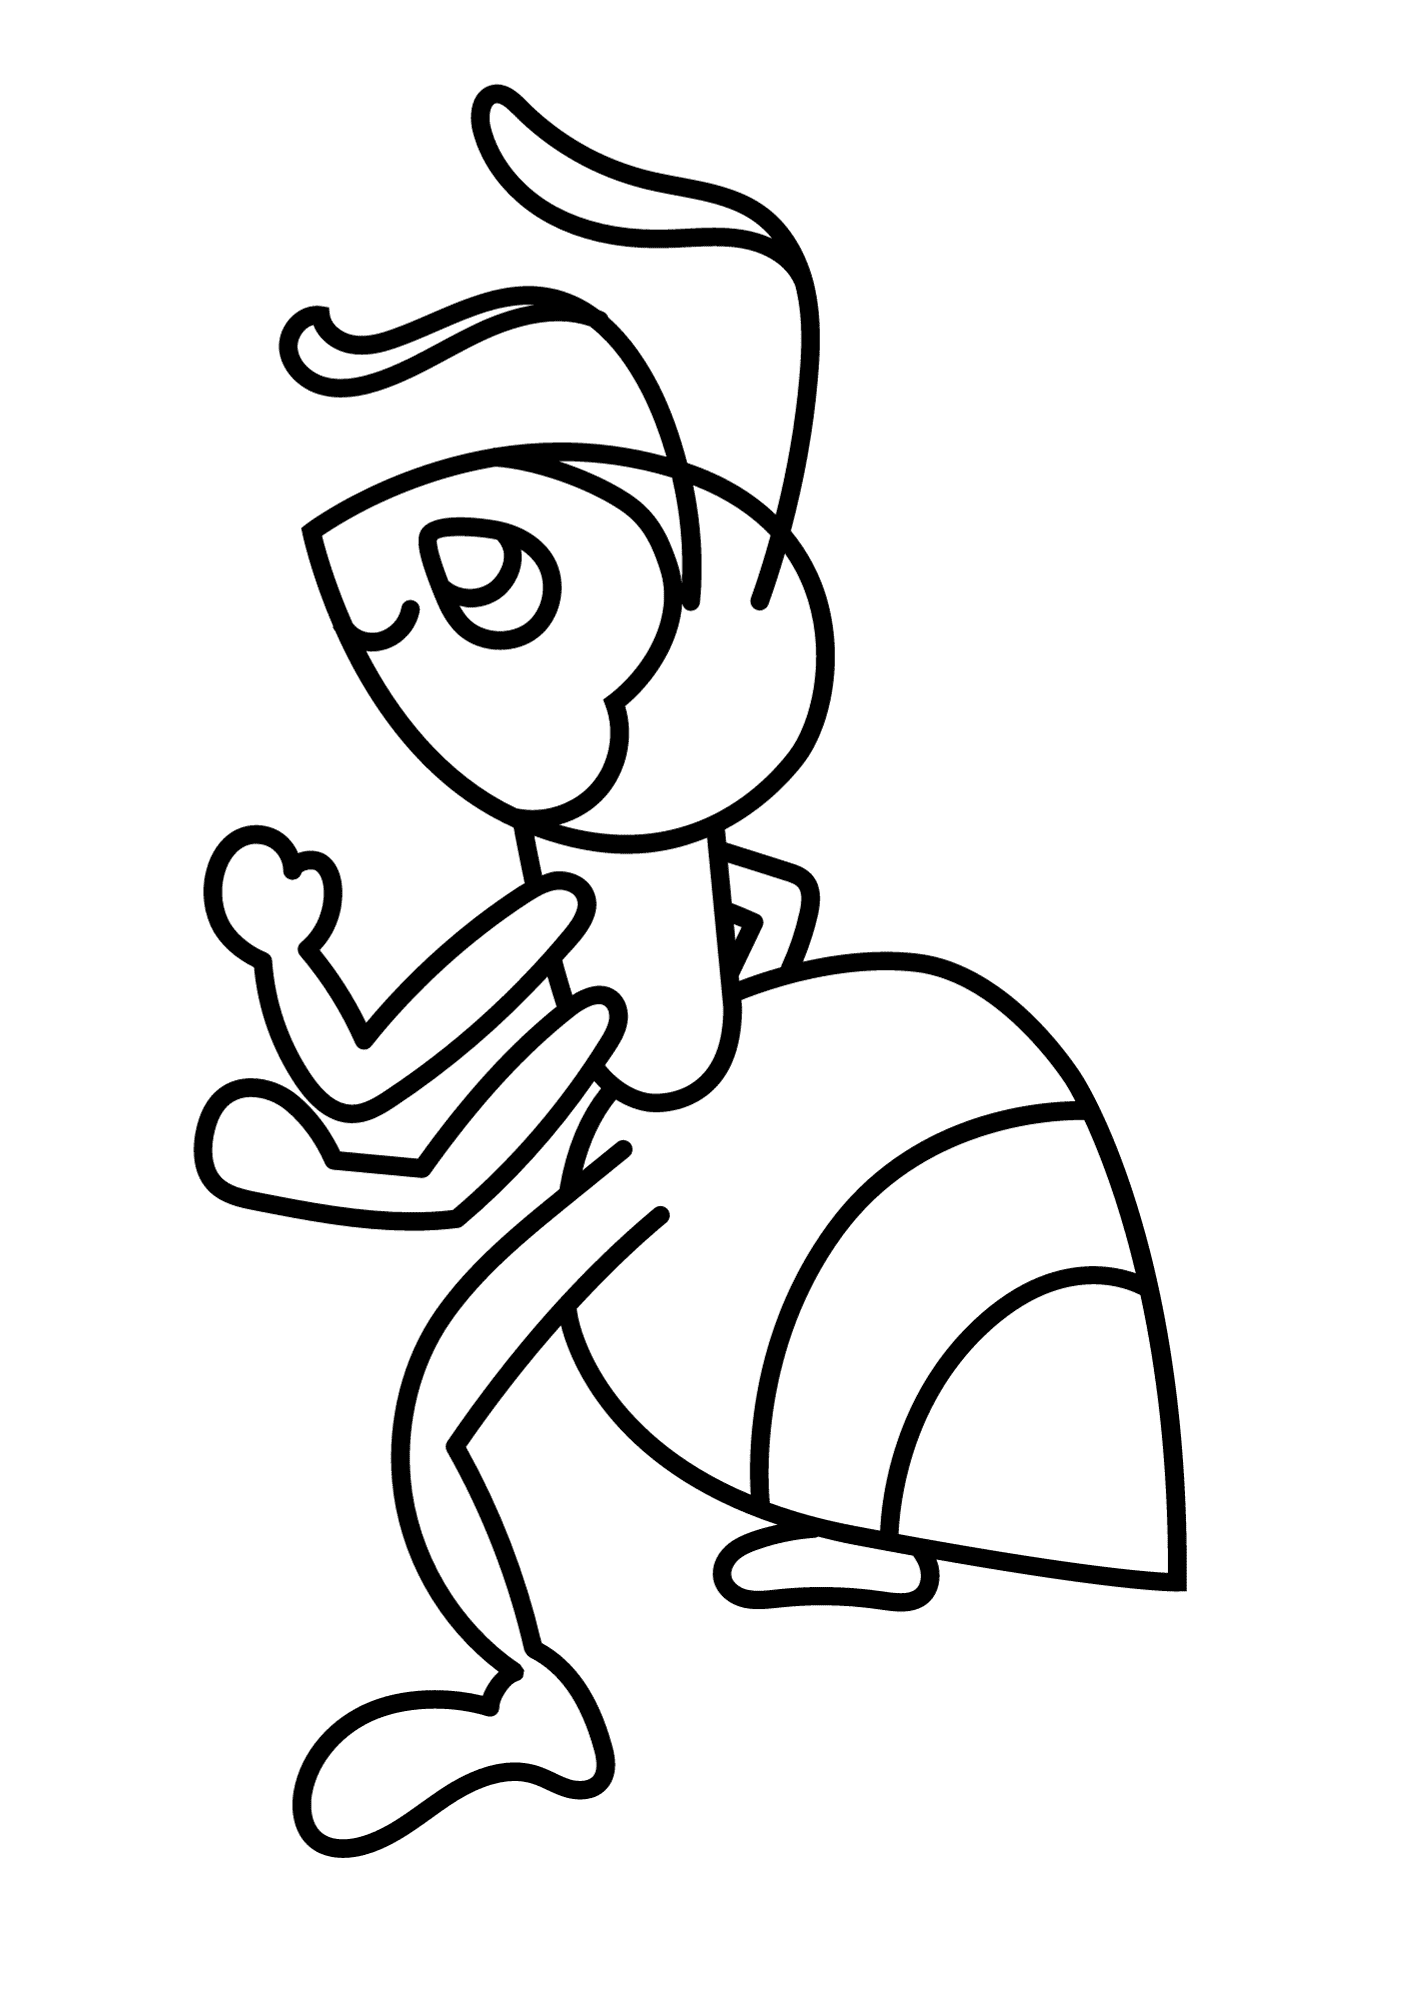 Love Ant Coloring Page